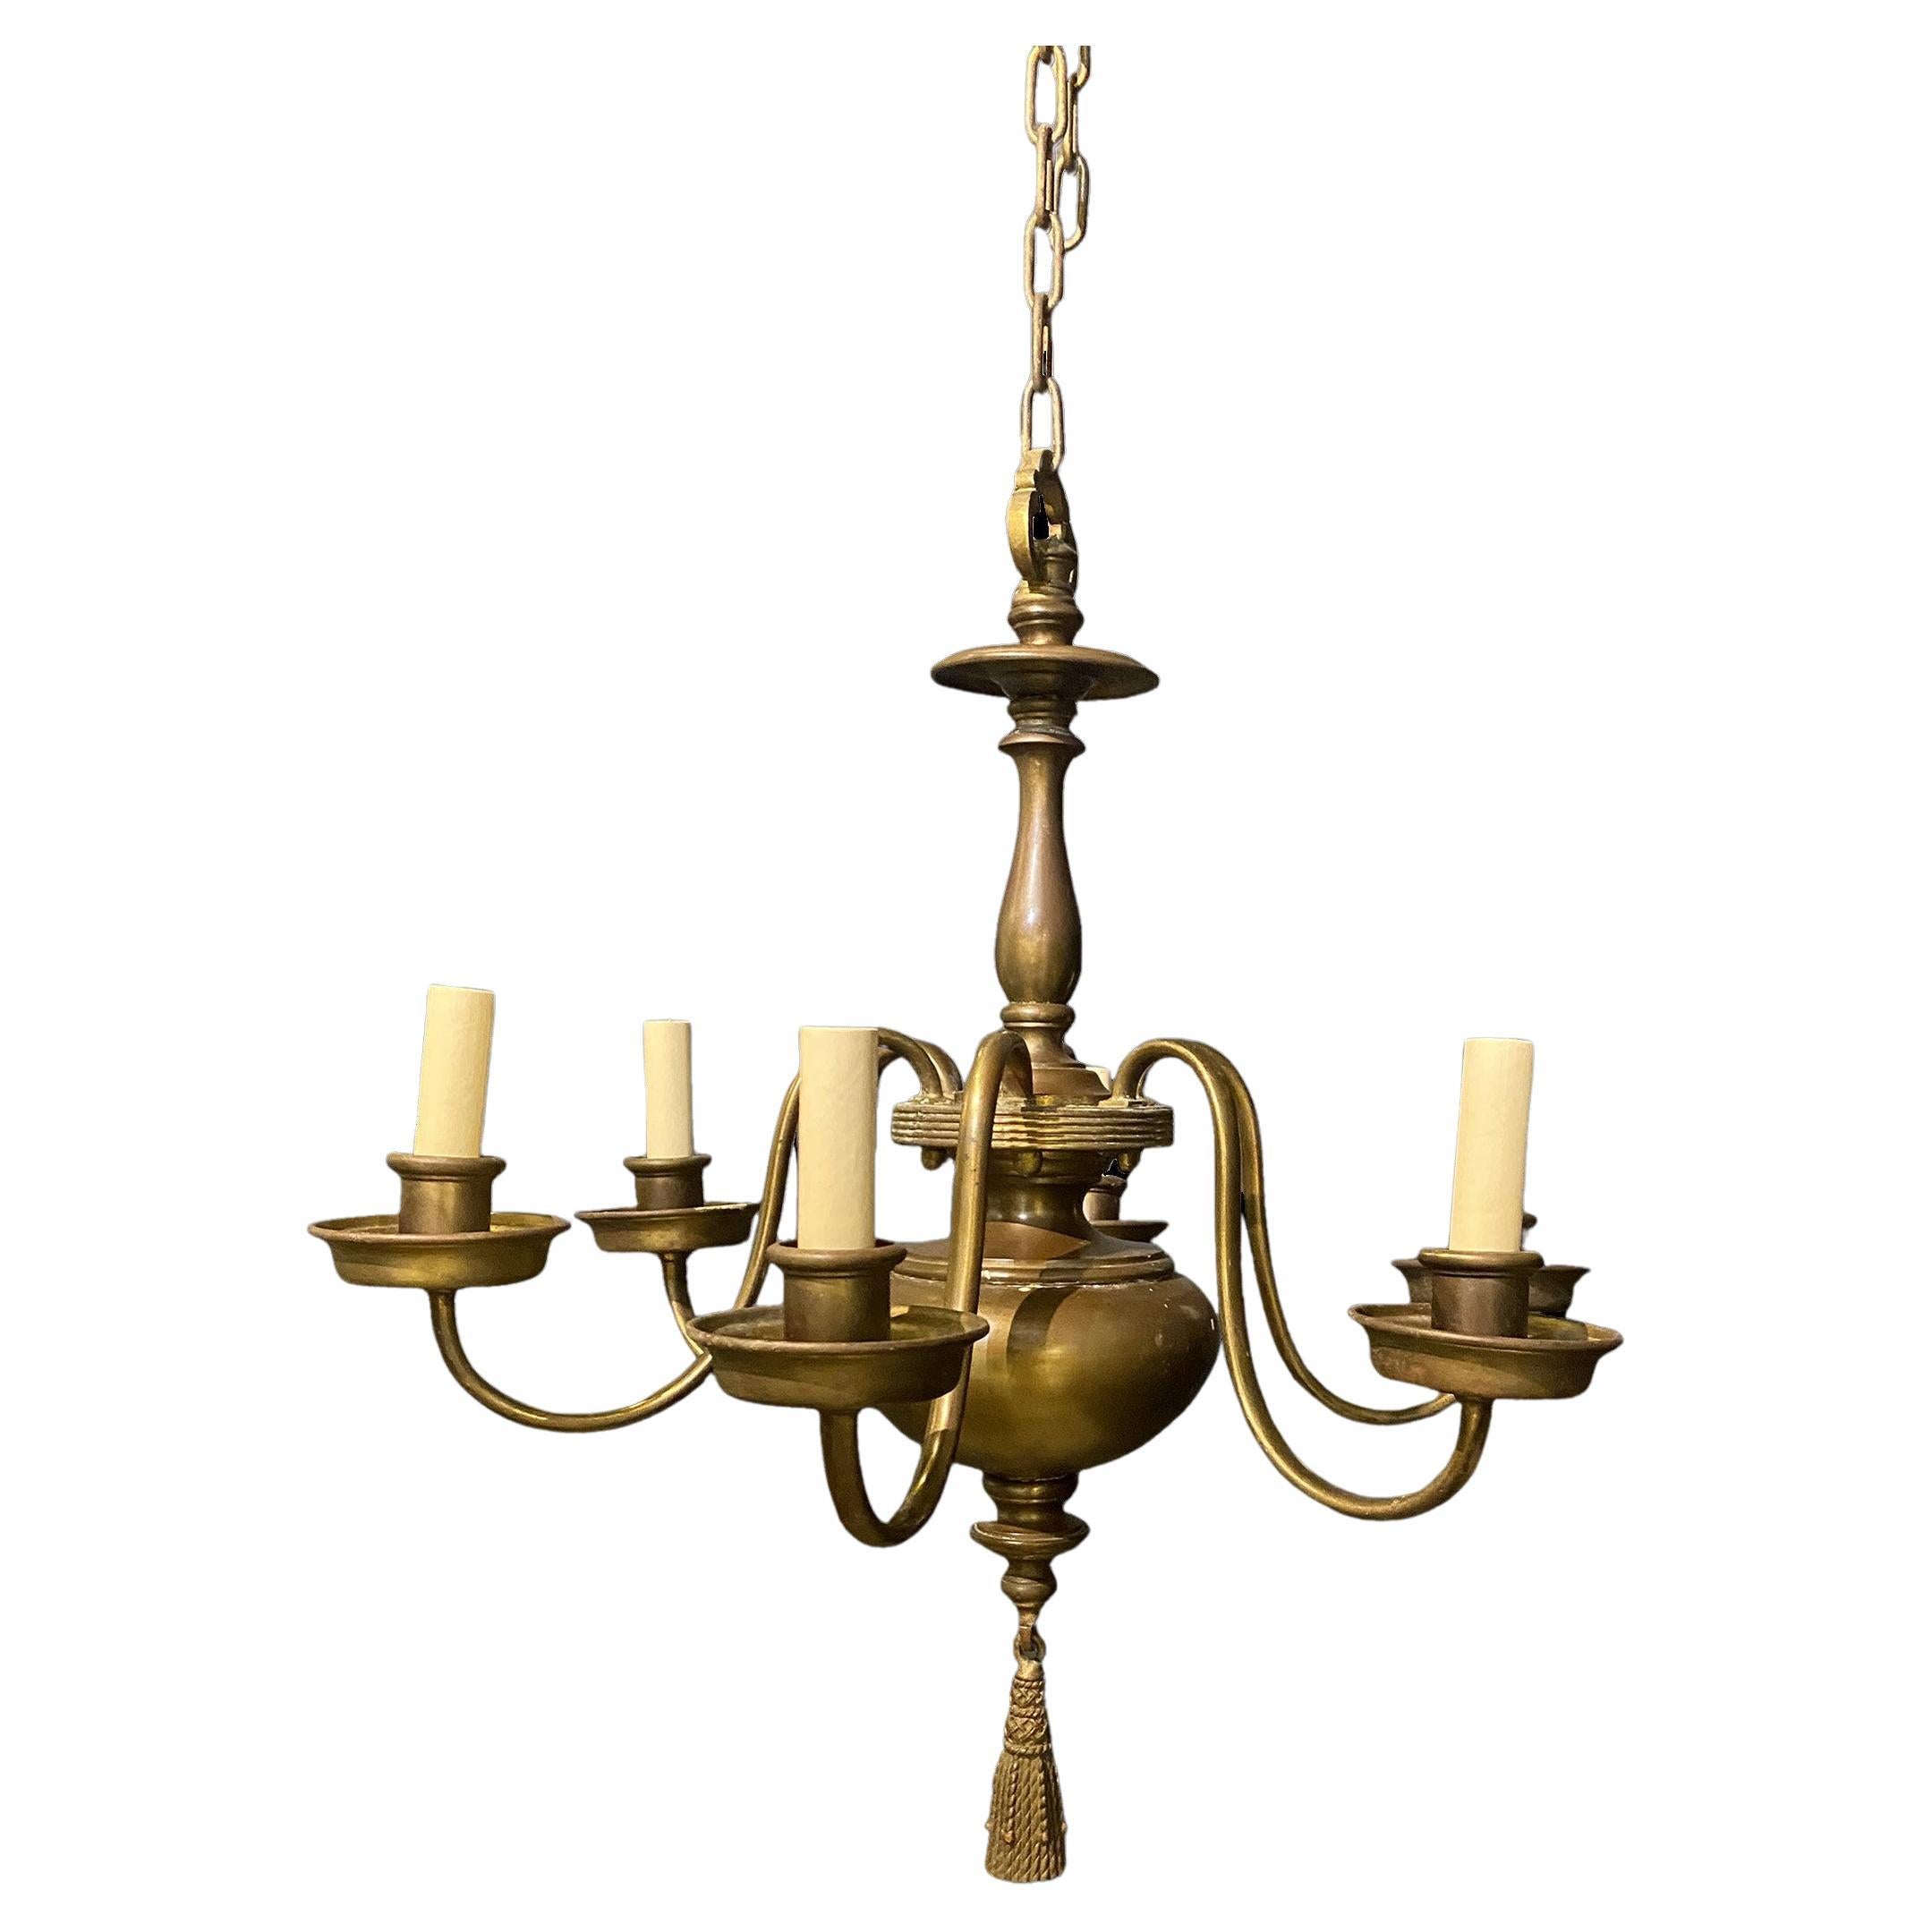 1910's Caldwell Williamsburg Style Bronze Chandelier with 6 Lights For Sale